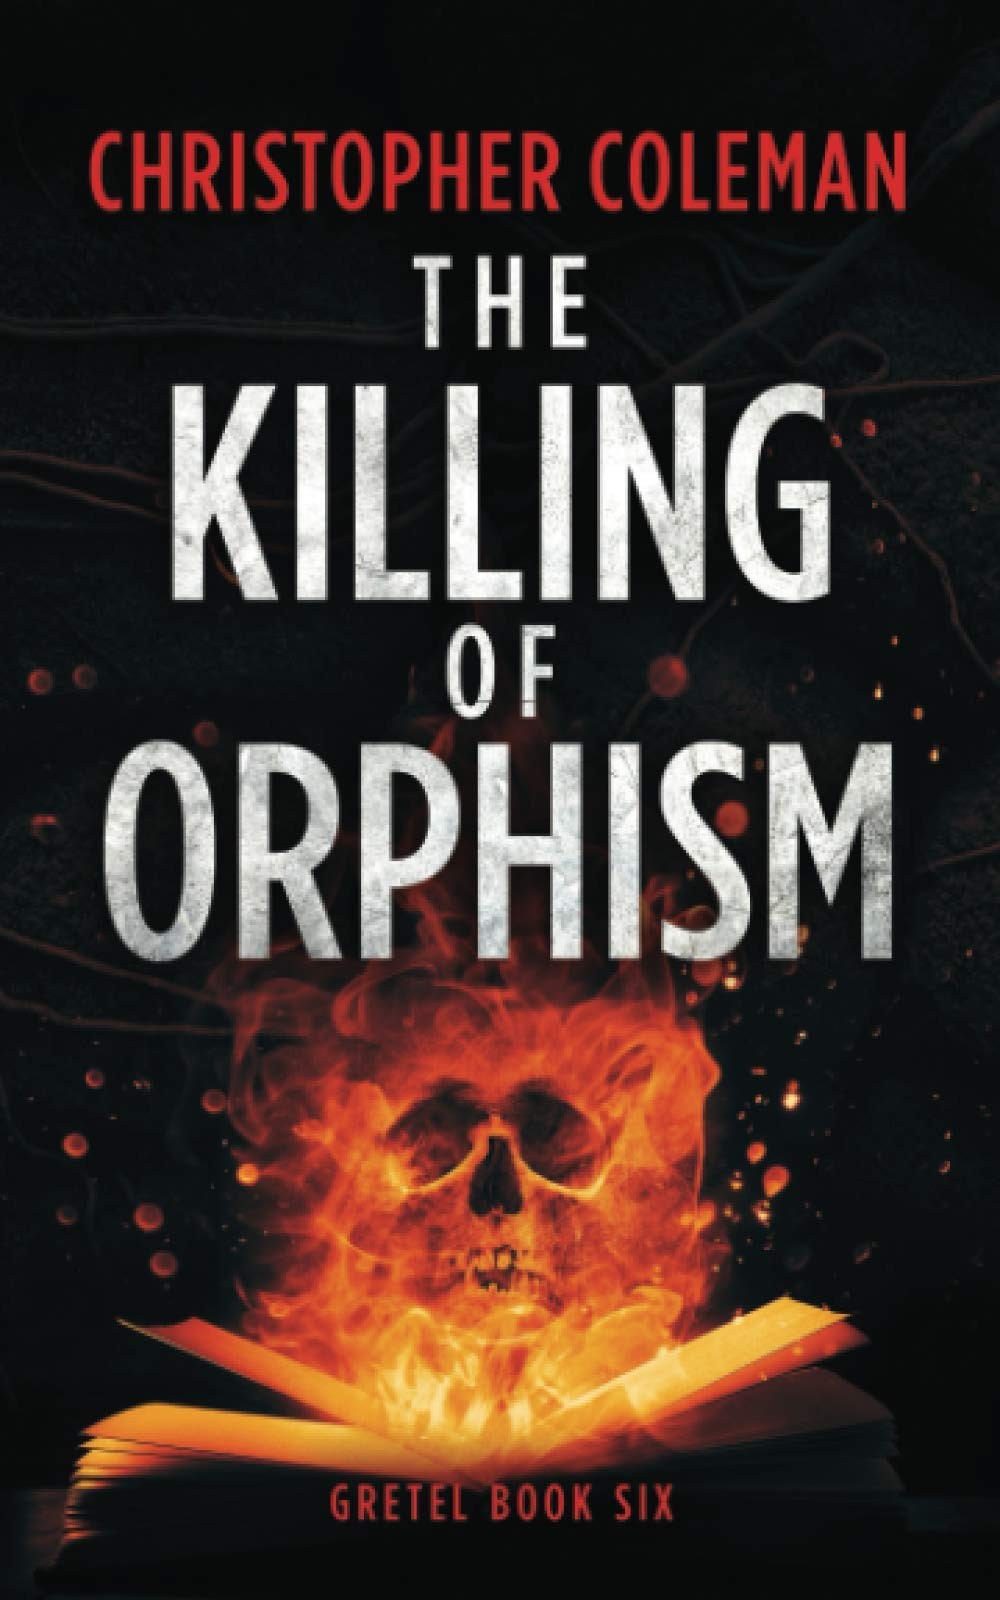 The Killing of Orphism